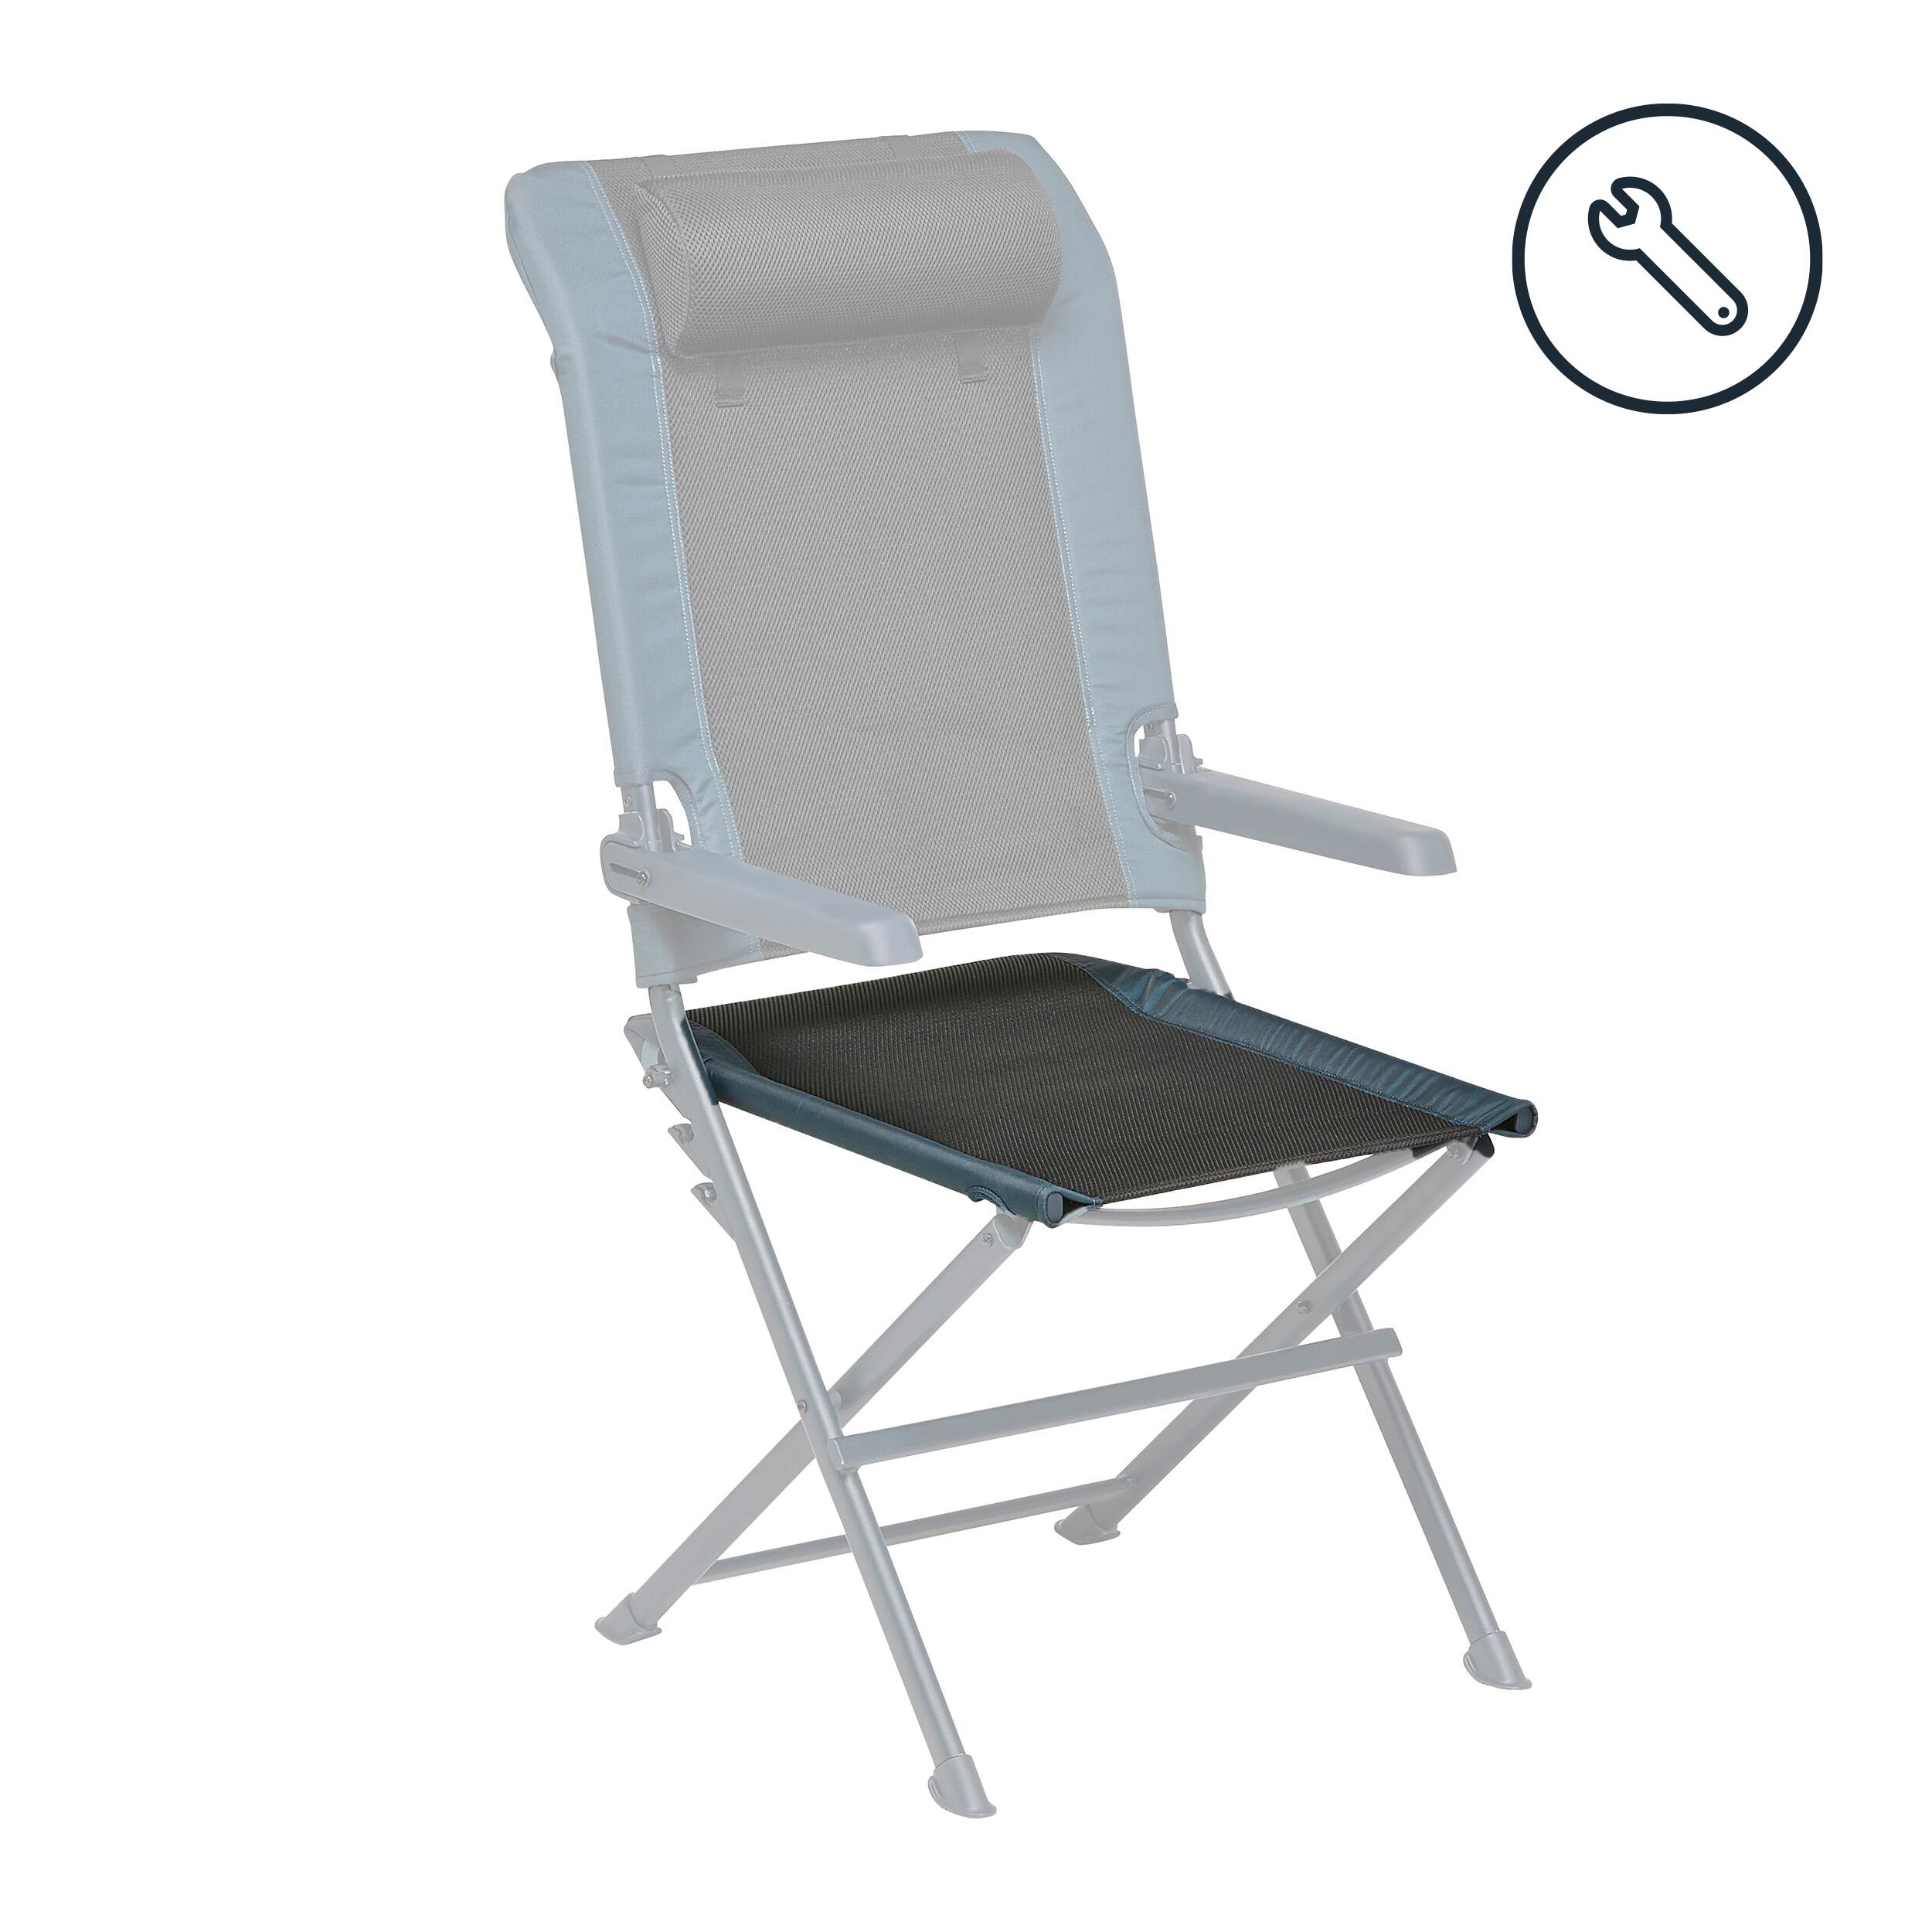 REPLACEMENT SEAT - SPARE PART FOR CHILL MEAL MULTIPOSITION CHAIR 1/1